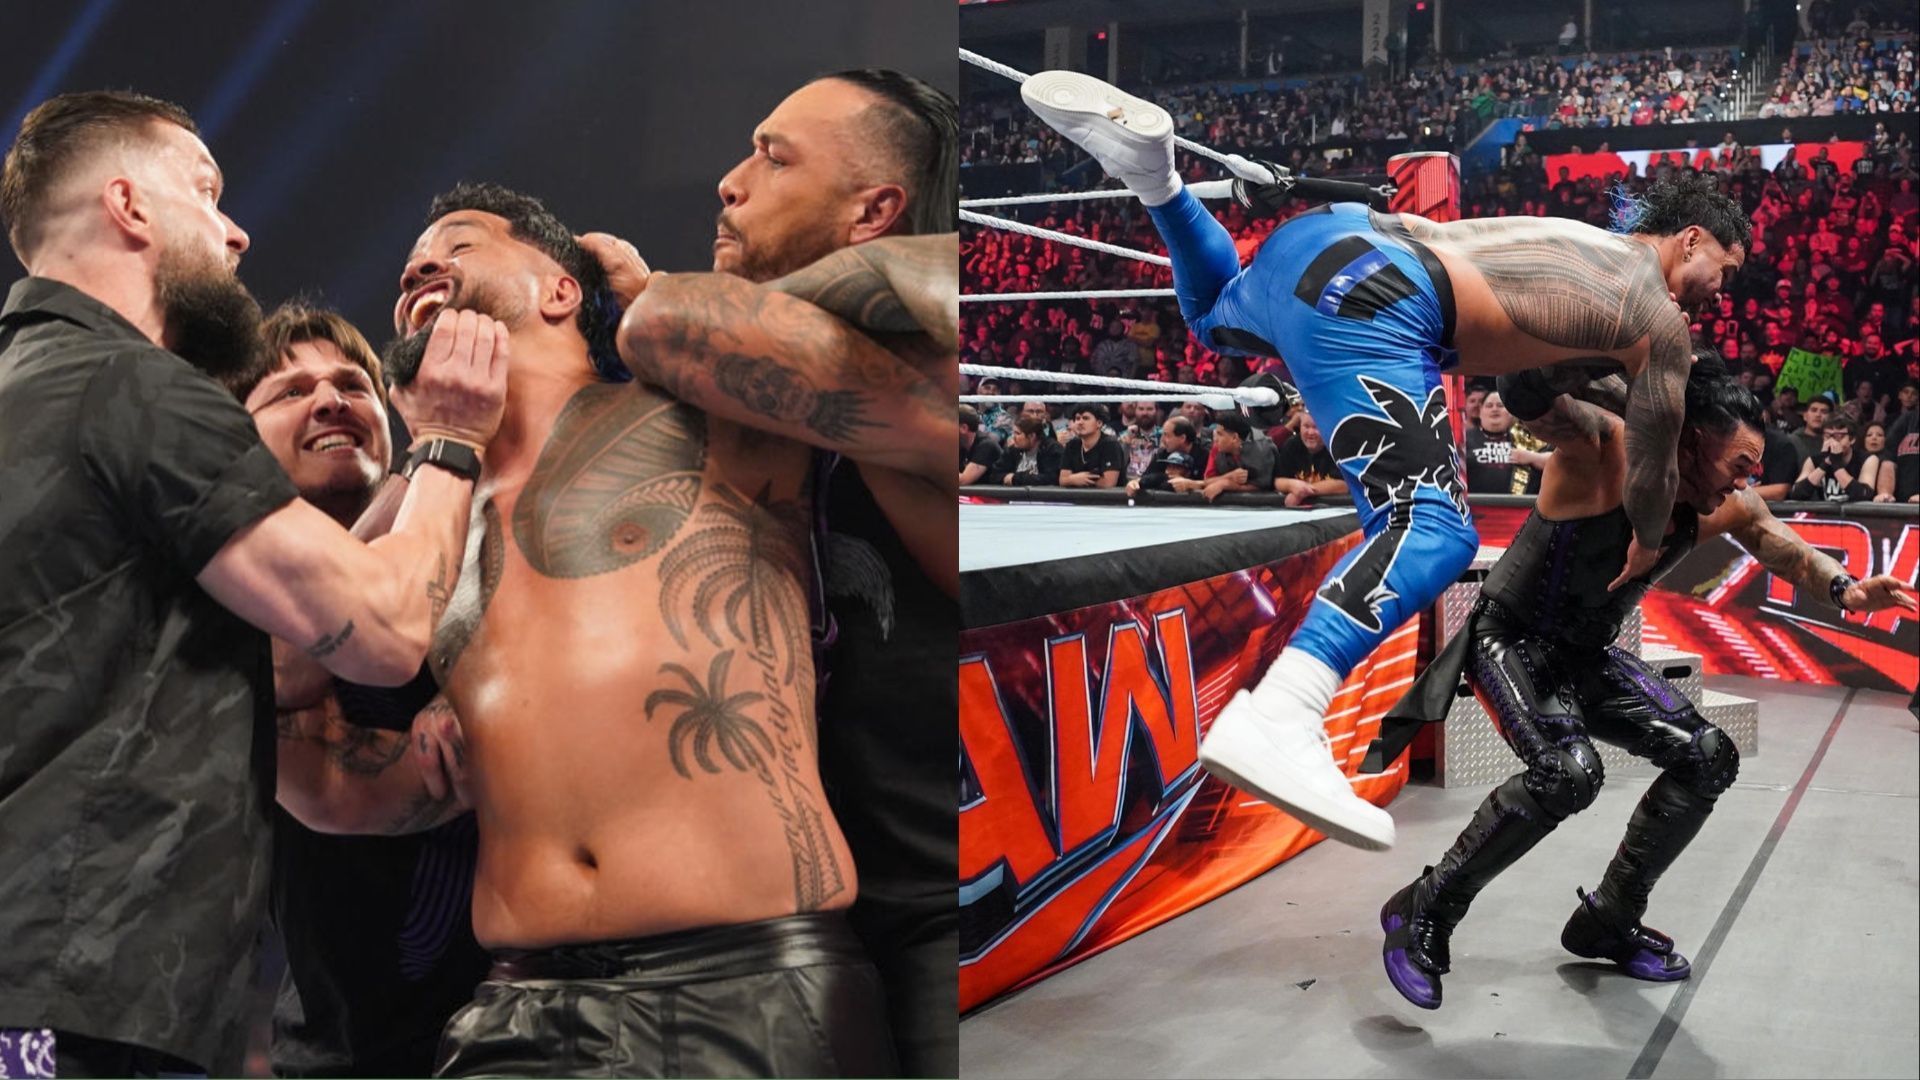 Jey Uso and Damian Priest will collide on WWE RAW this week.